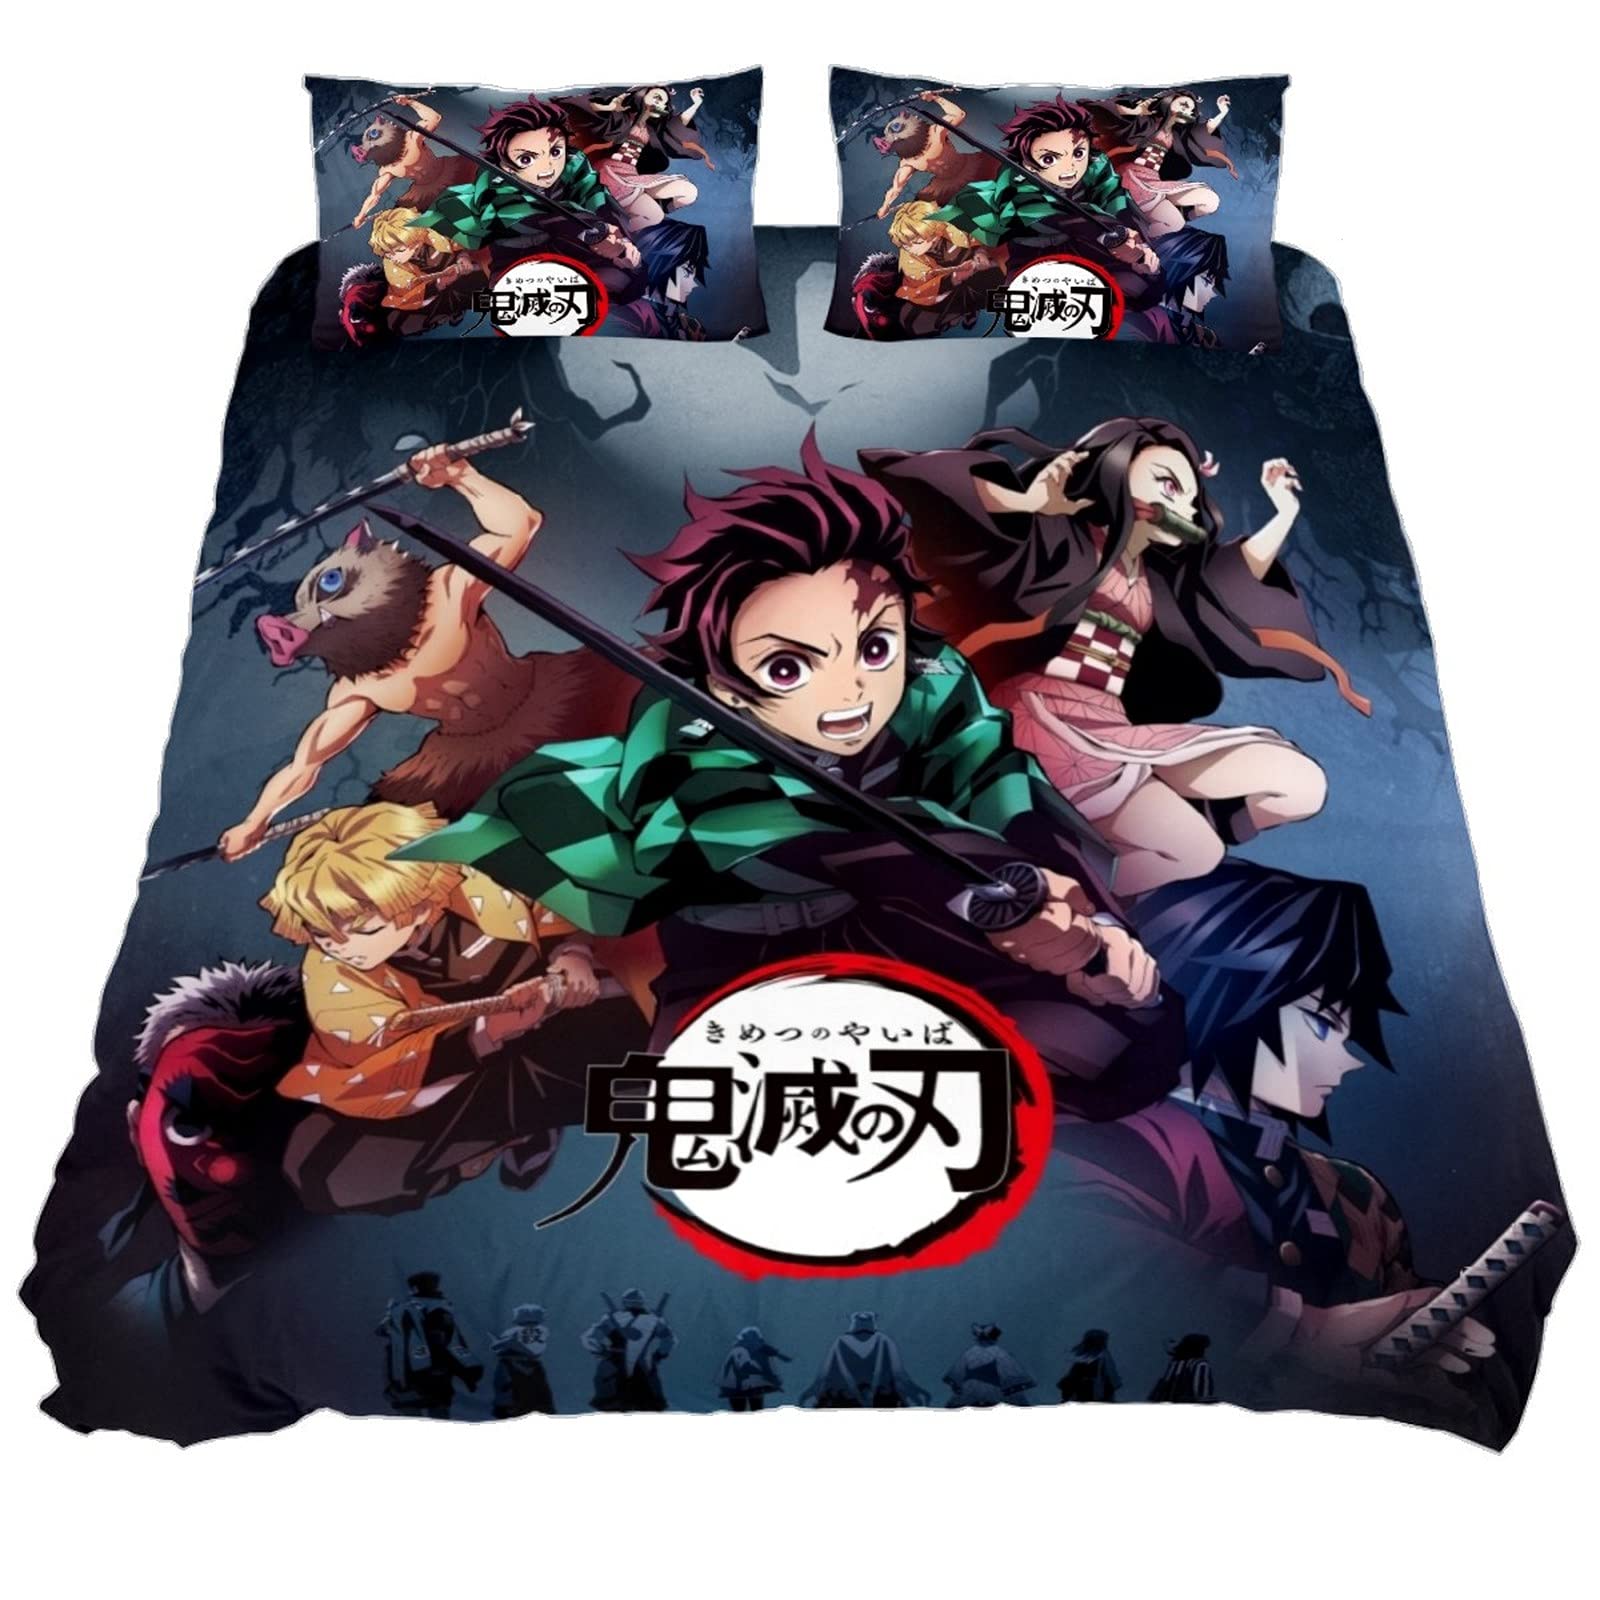 DDQQ Anime Bedding Set 3D Printed Twin Size Japan Anime Bed Set 3Pcs Lovely  Soft/Breathable Comforter Cover